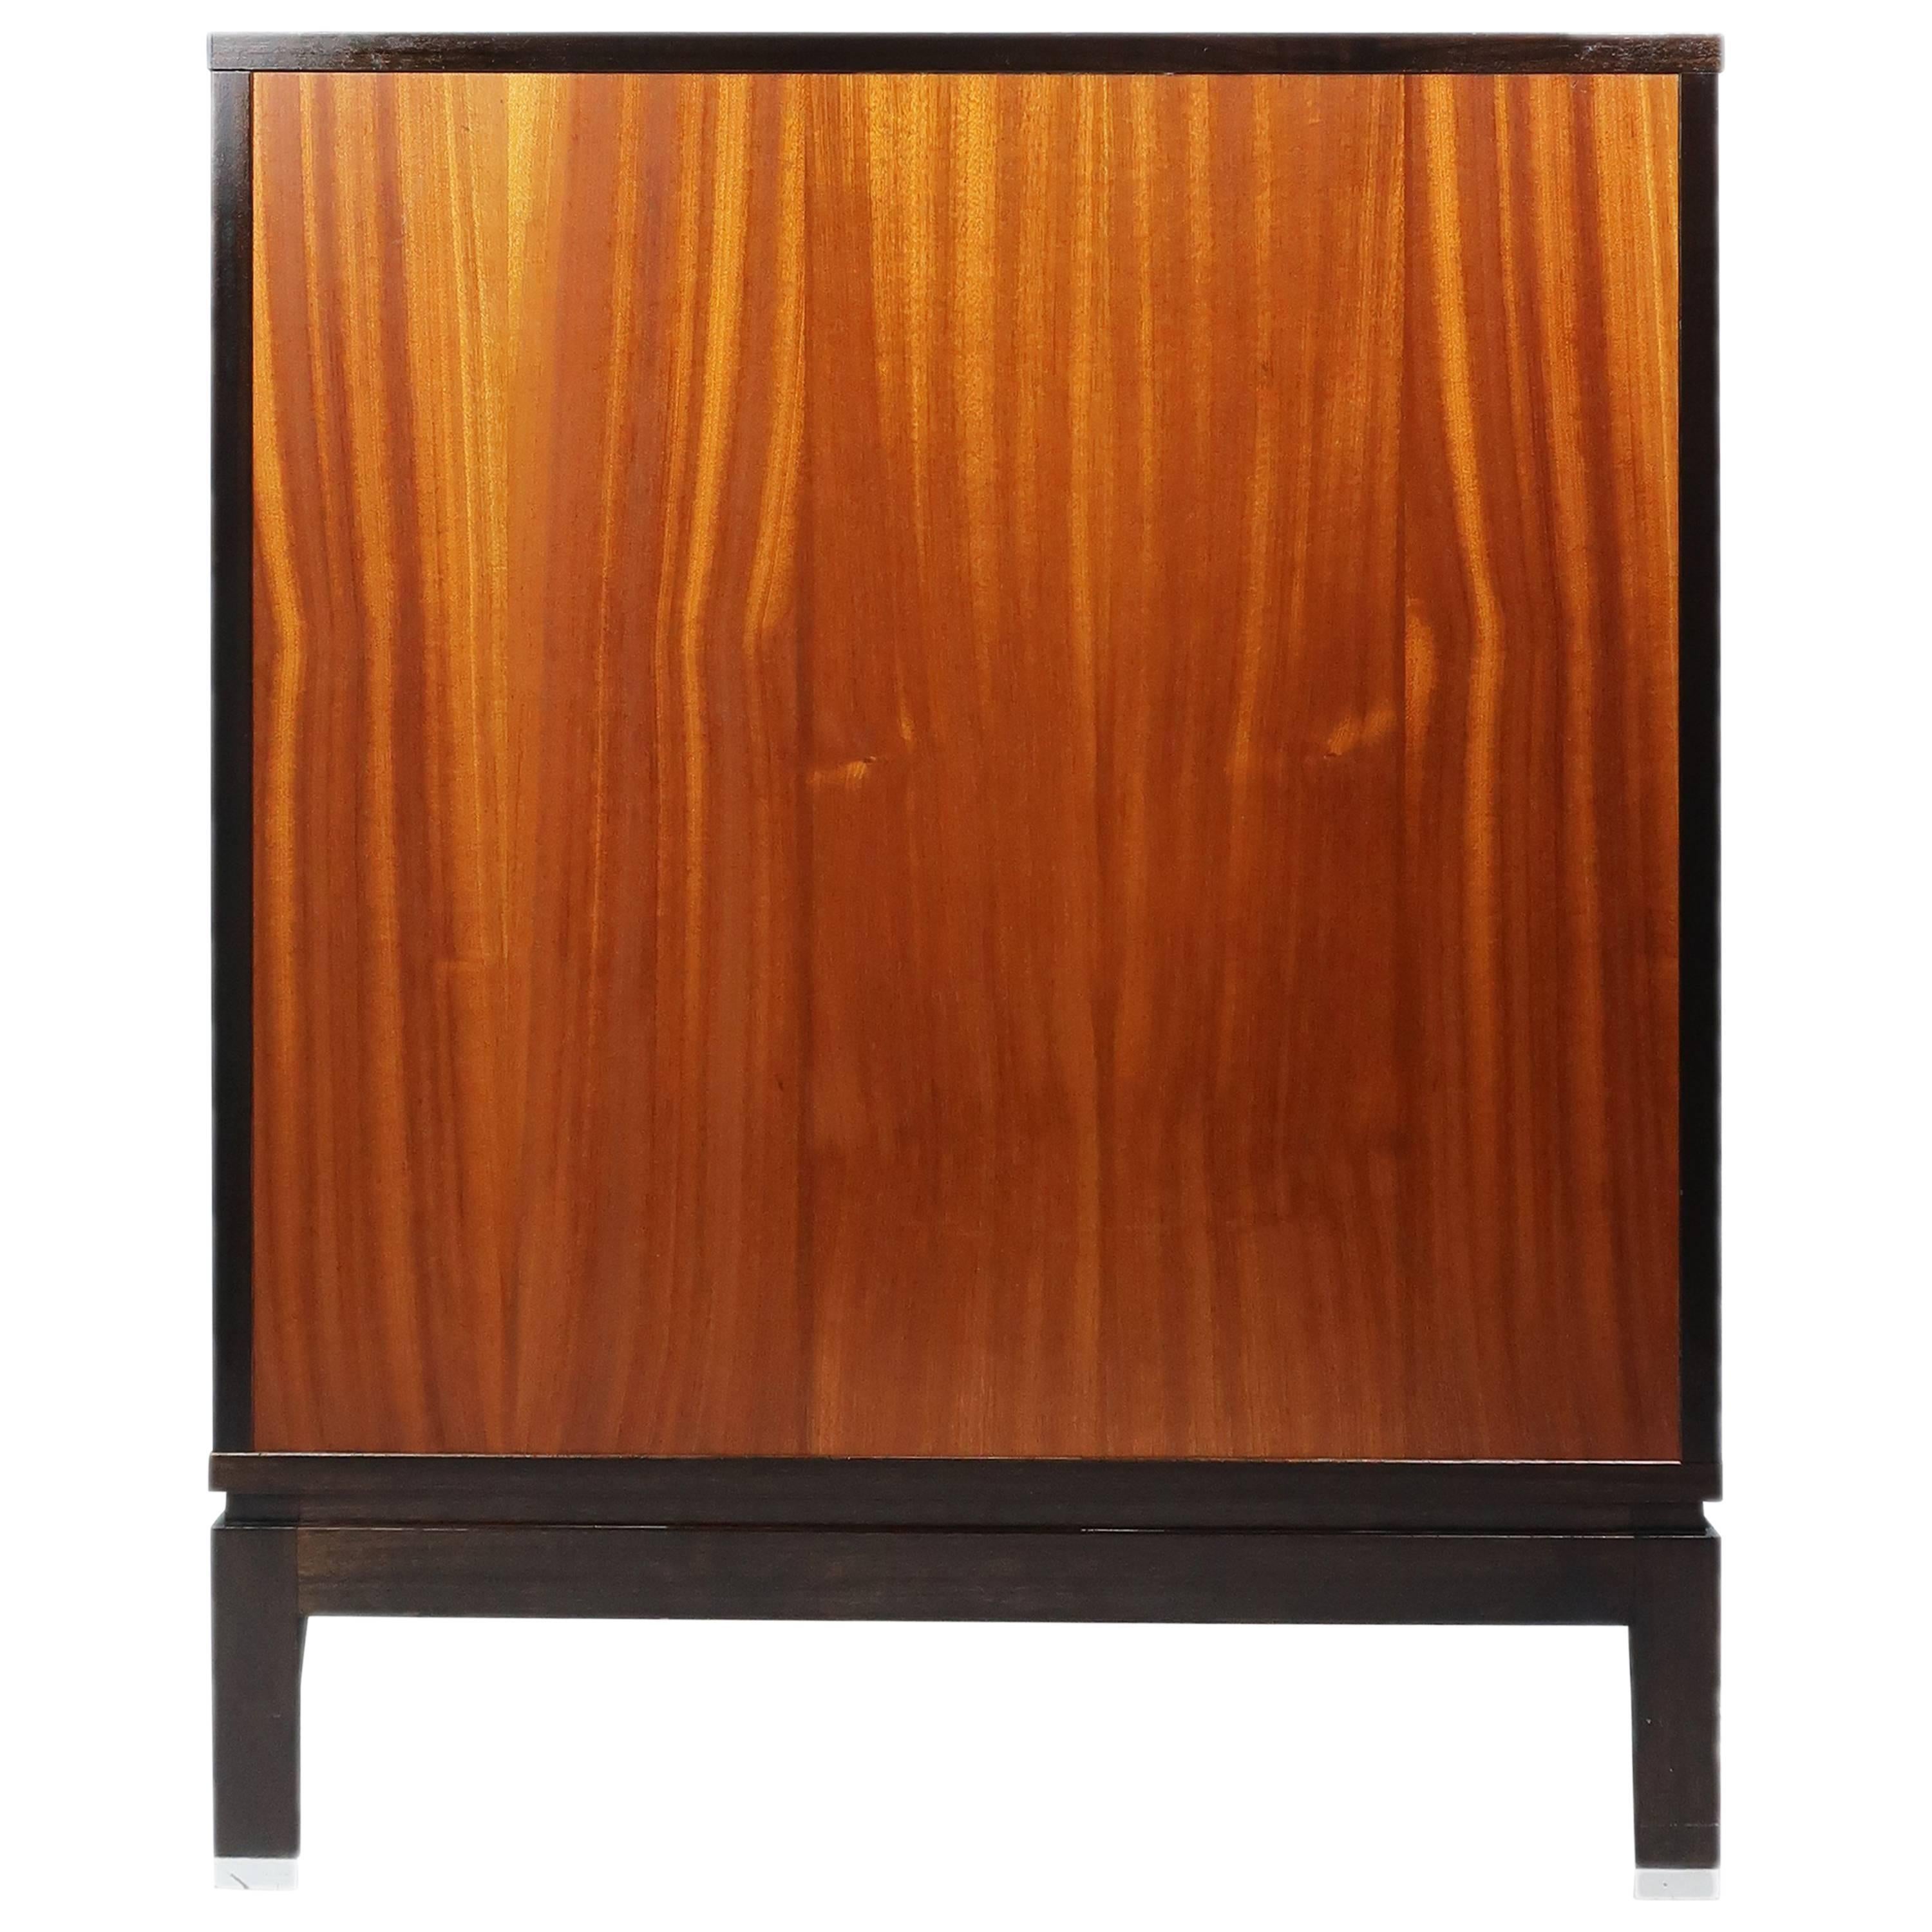 A stunning Italian modern rosewood chest of drawers by M.I.M. (Mobili Italiani Moderni), circa 1960. Well-known for producing a large number of pieces of Ico & Lusia Parisi's work, M.I.M. was located in Rome, Italy, in the 1950s and 1960s and